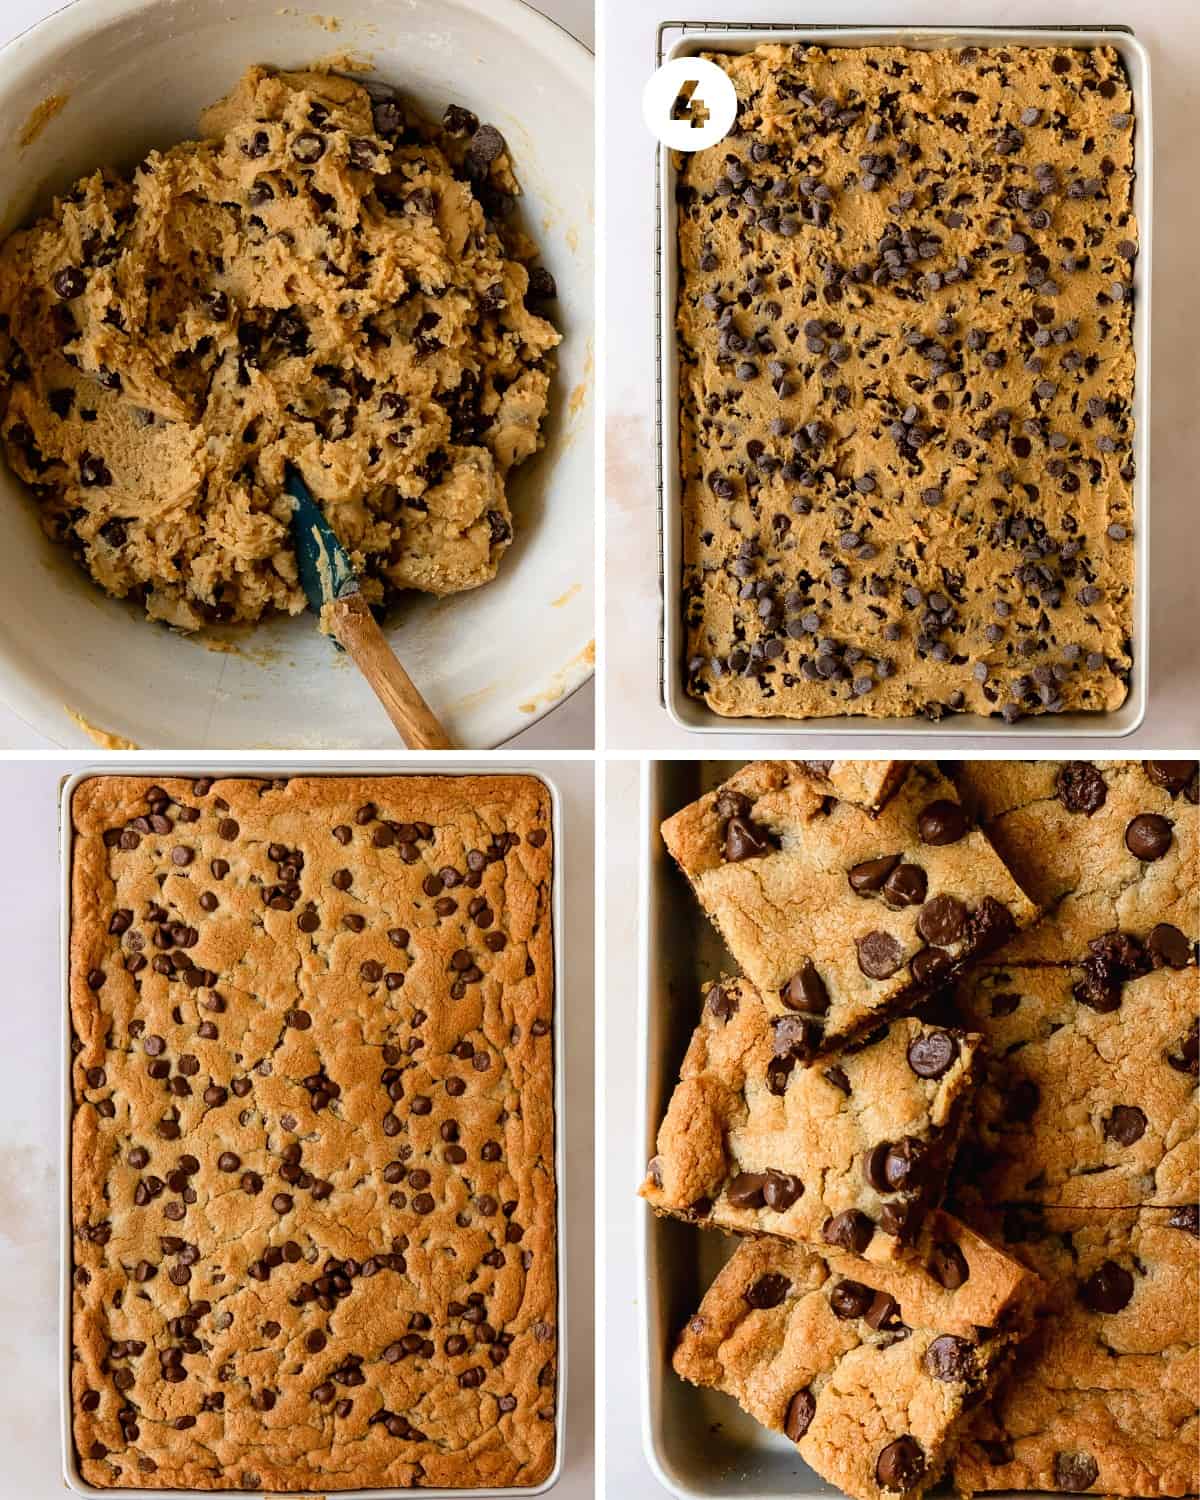 Press the cookie dough into the prepared pan. Use a flexible spatula to smooth the chocolate chip cookie dough evenly across the pan. Top with the reserved chocolate chips. Bake for about 20 - 25 minutes or until the pan of cookies is a light golden brown and the edges are slightly pulled away from the sides of the jelly roll pan. Cool the bars in the pan to room temperature, slice and enjoy!